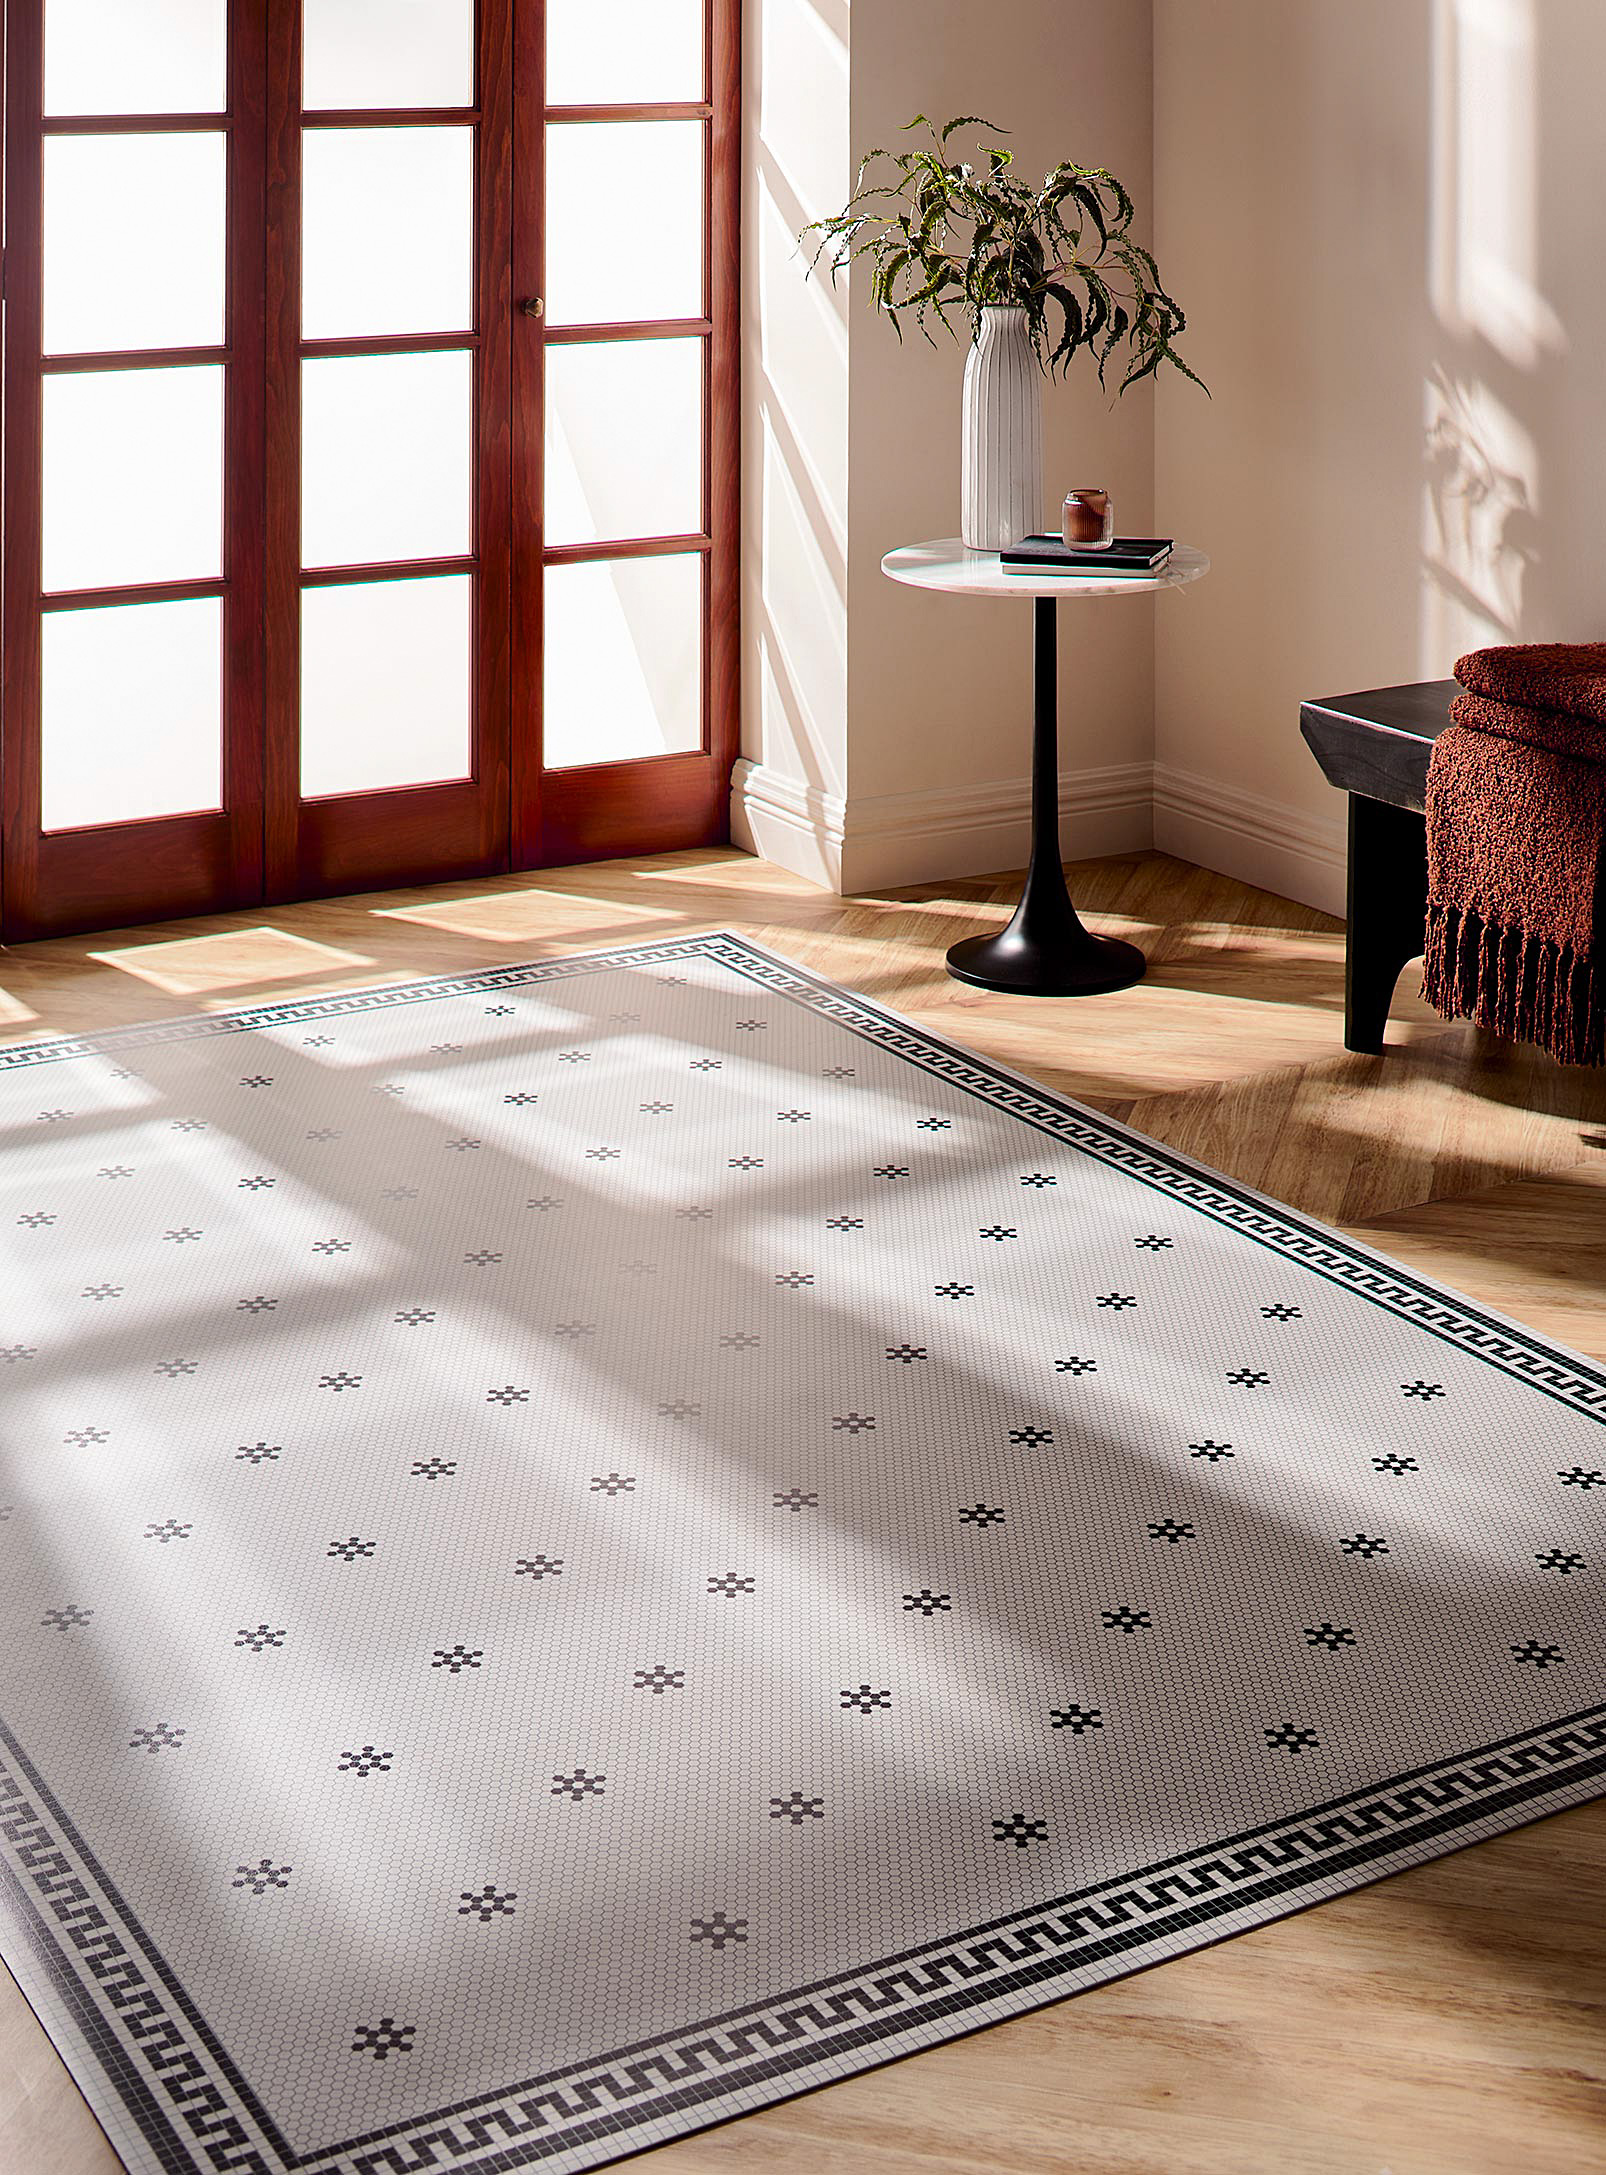 Adama Starry Fresco Vinyl Rug See Available Sizes In Patterned White